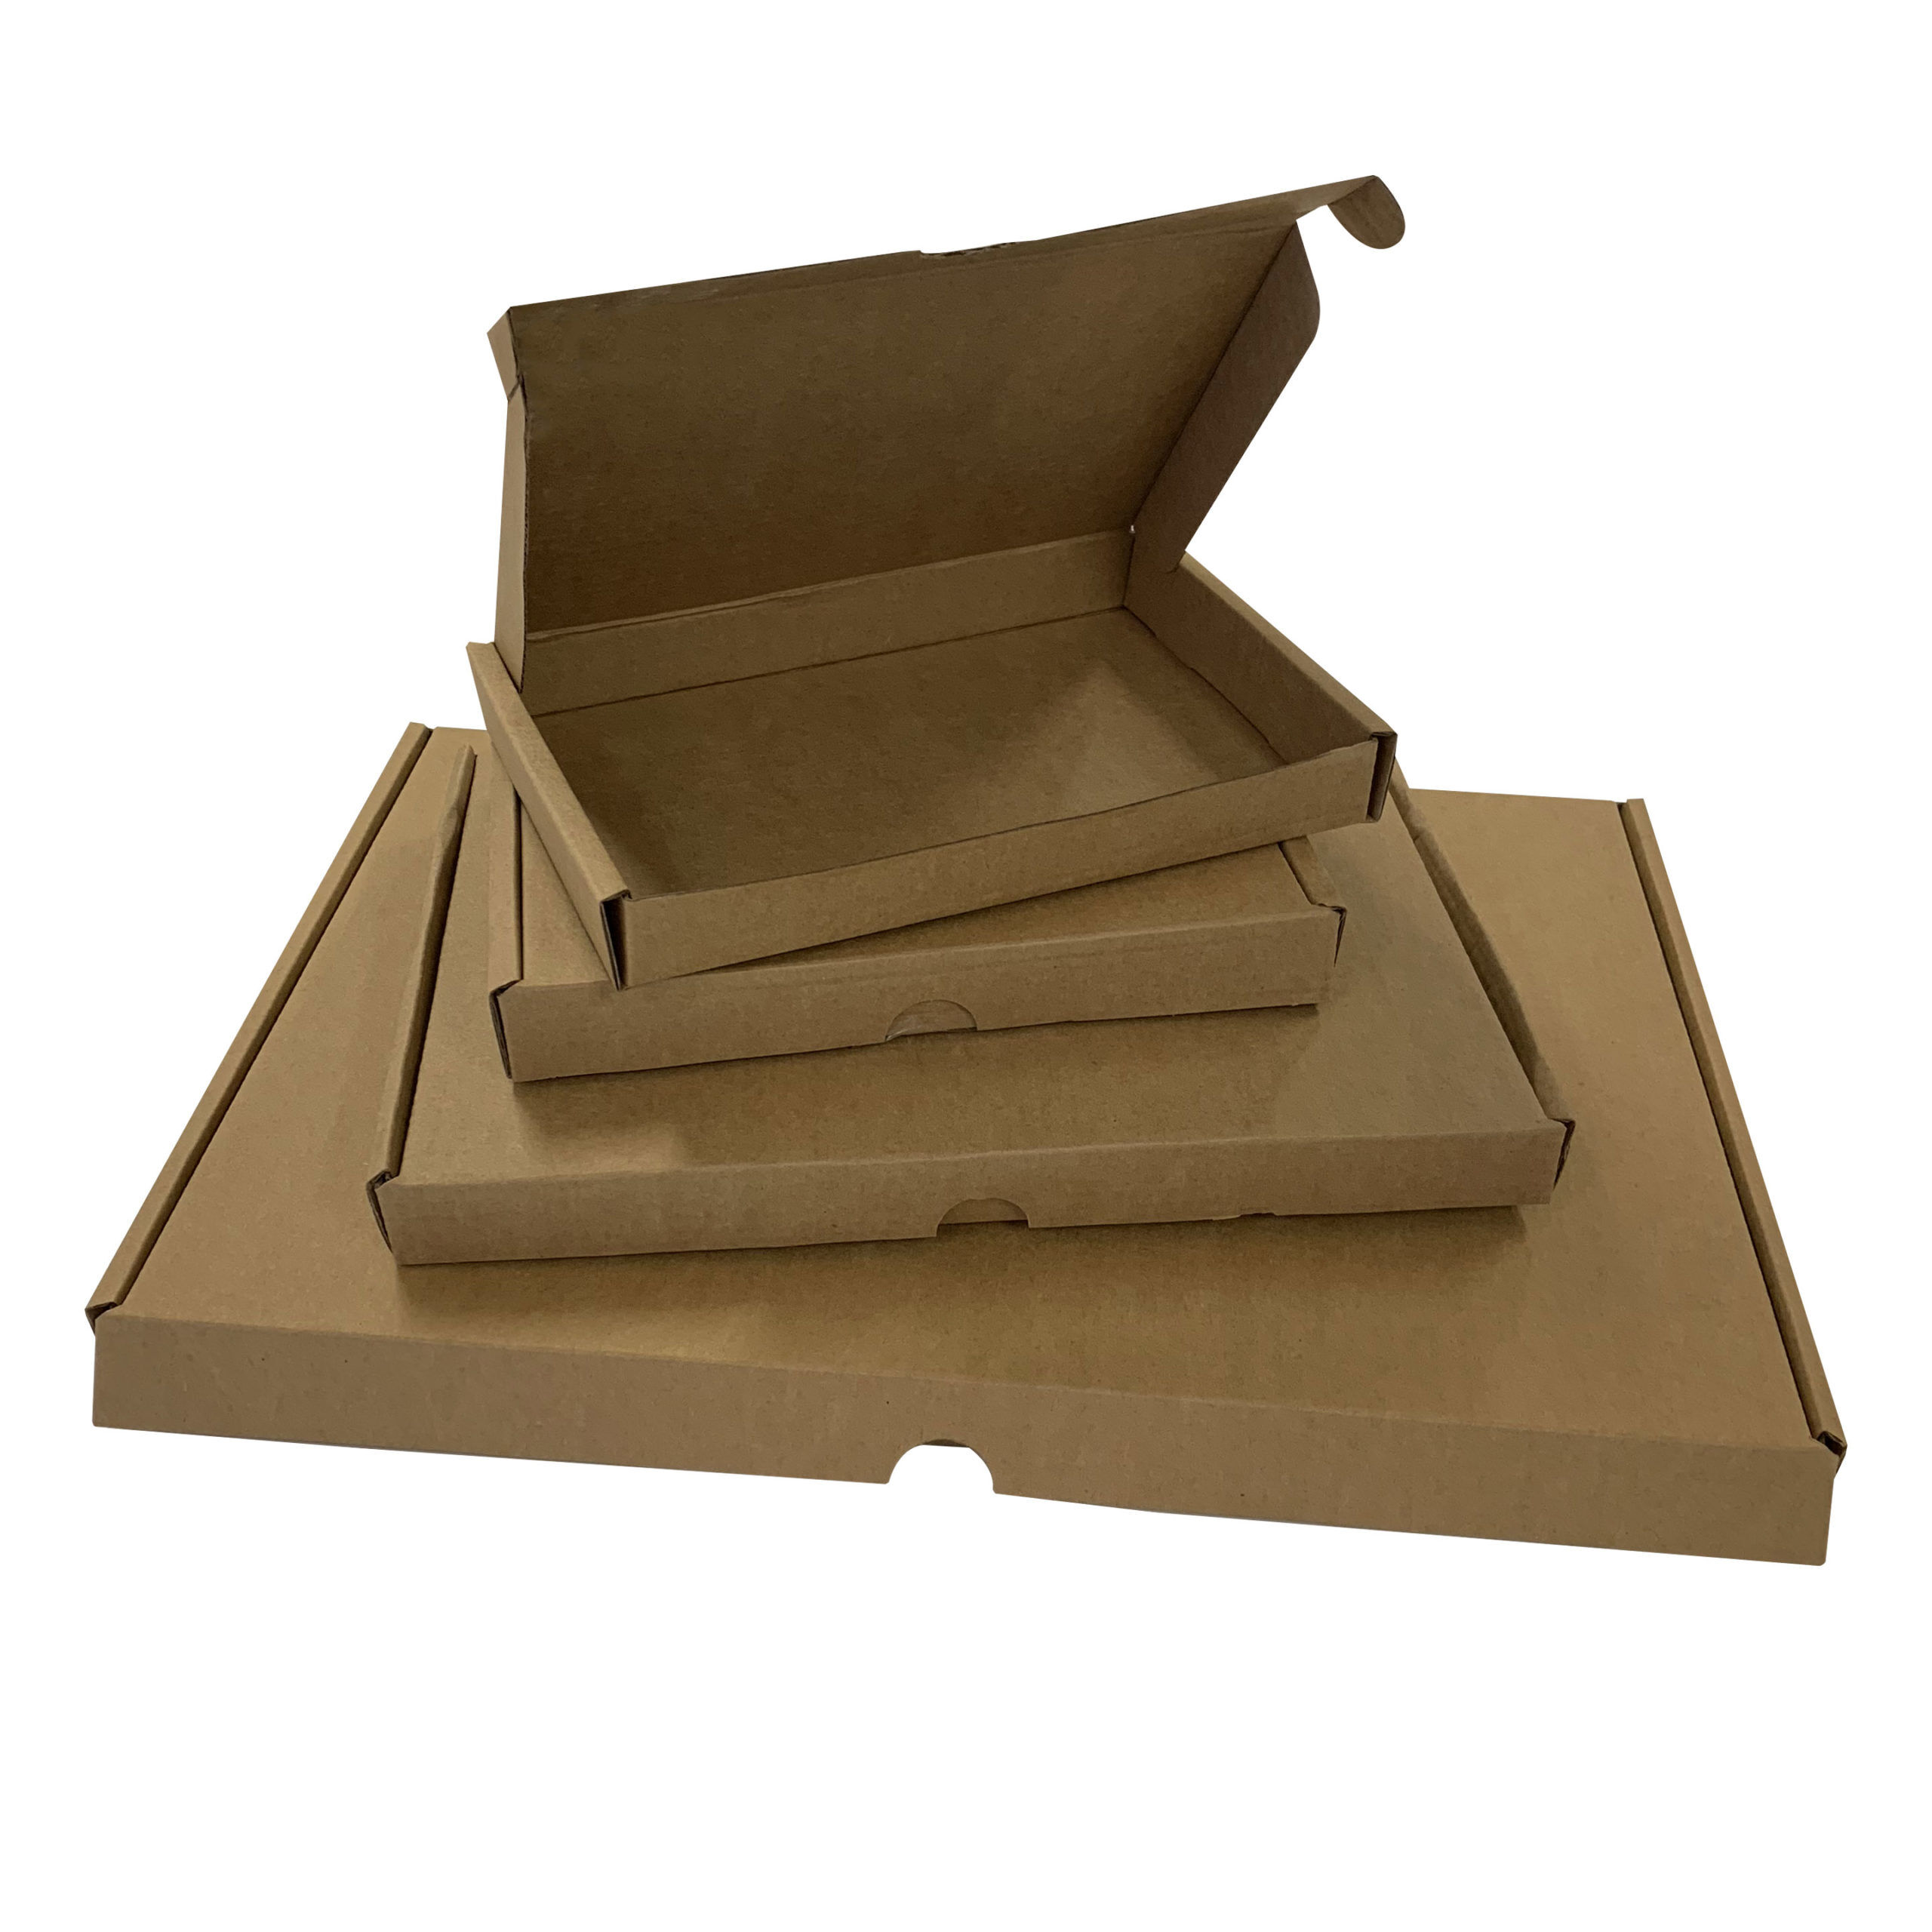 DL Royal Mail Large Letter PIP Strong Cardboard POSTAL Shipping Posting BOXES 